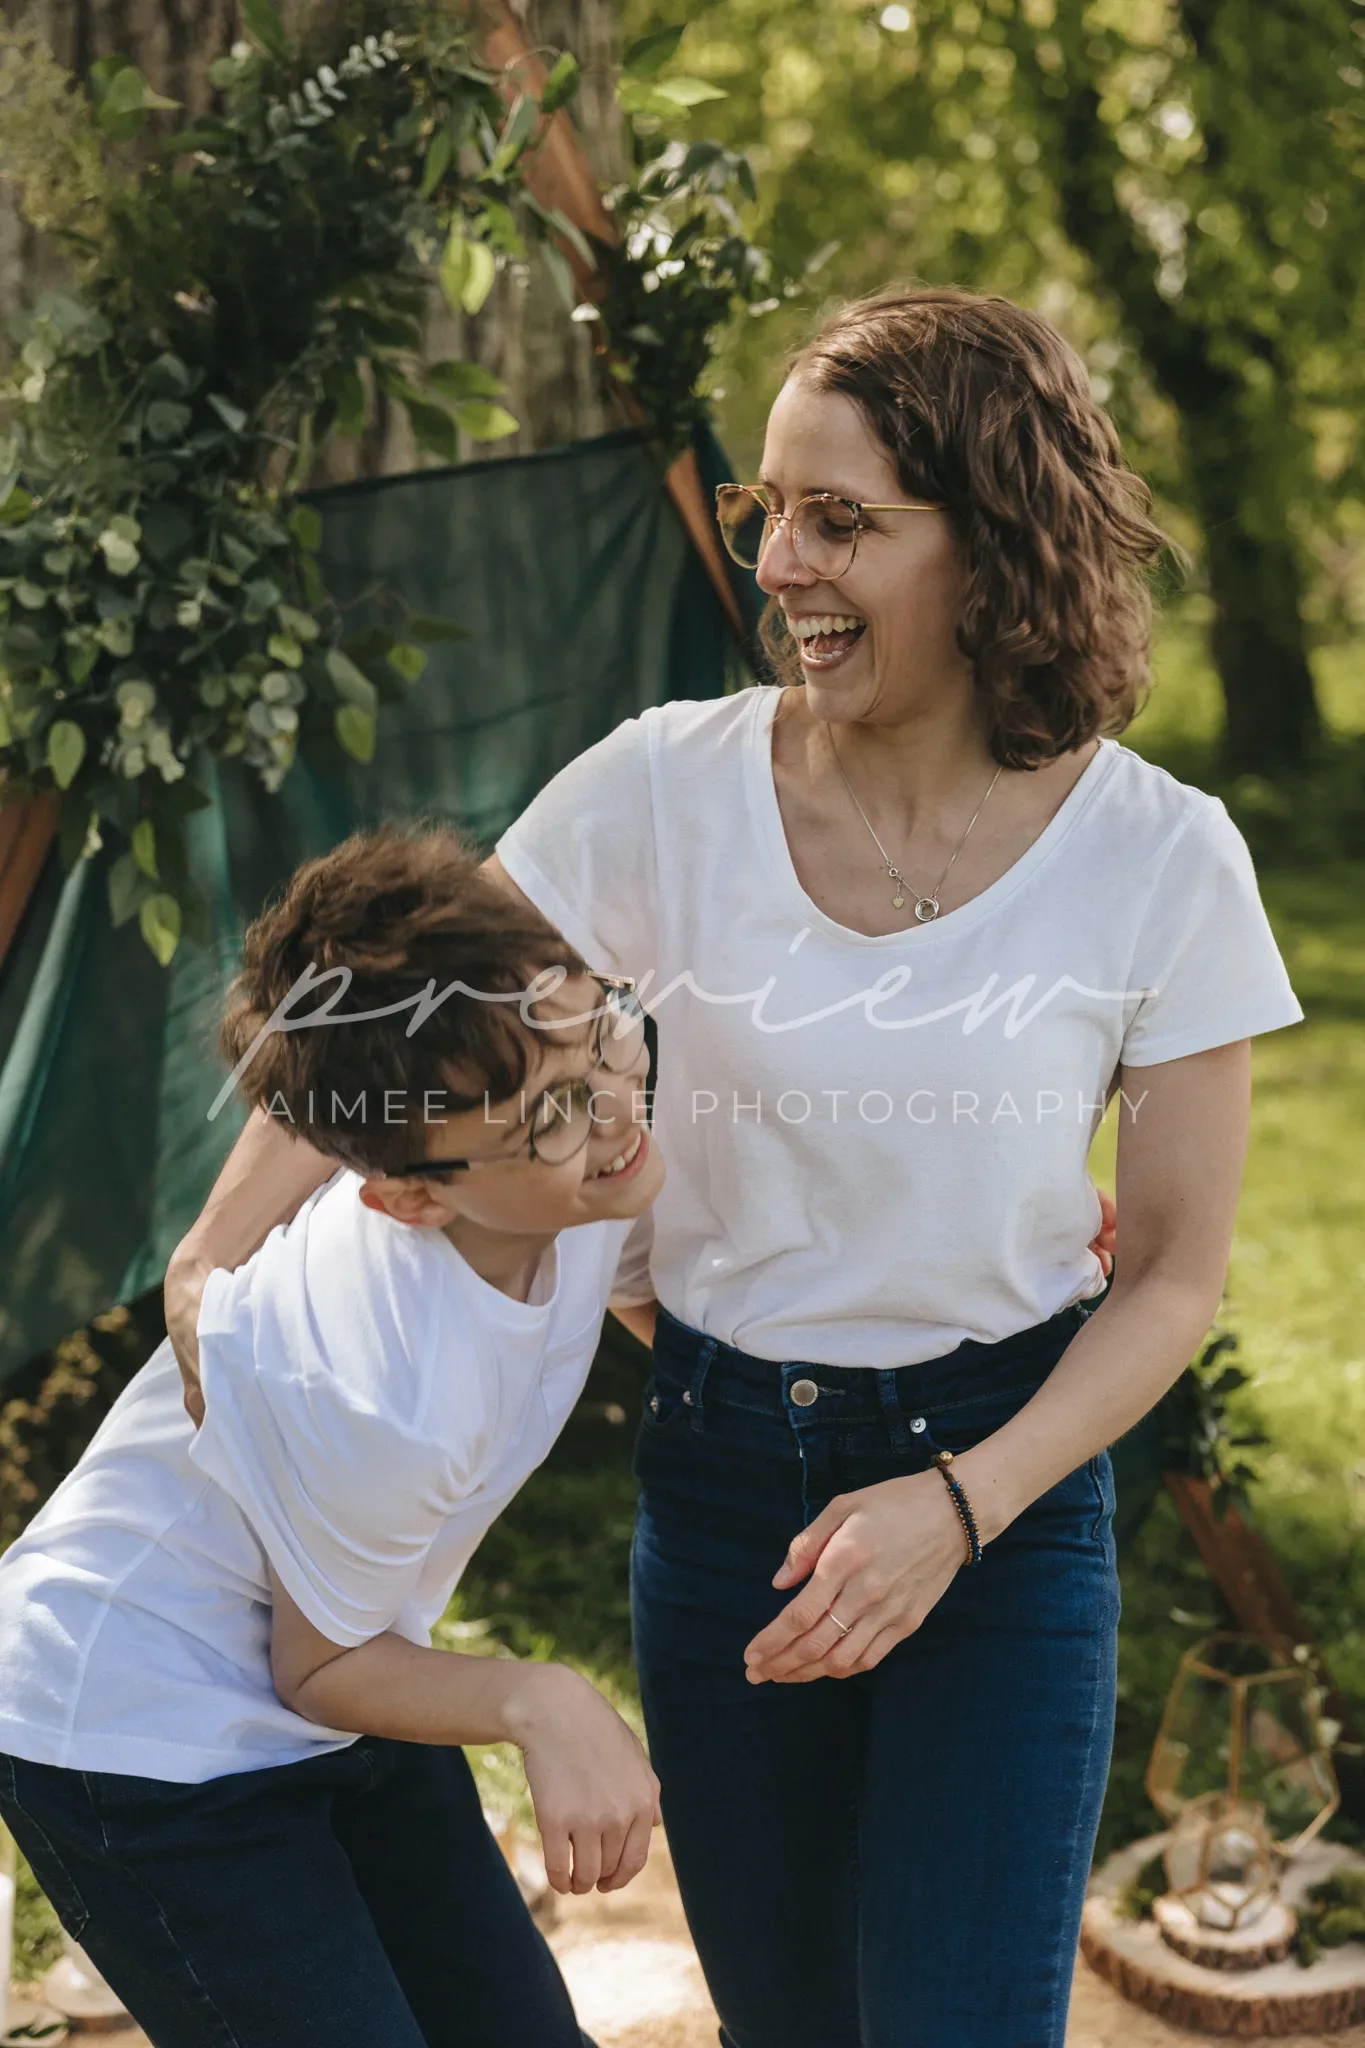 A woman and a young boy, both in white shirts and jeans, share a joyful moment in a sunny park. the boy leans against the woman, smiling broadly, as she looks down at him with a laugh. a tent and greenery are in the background.